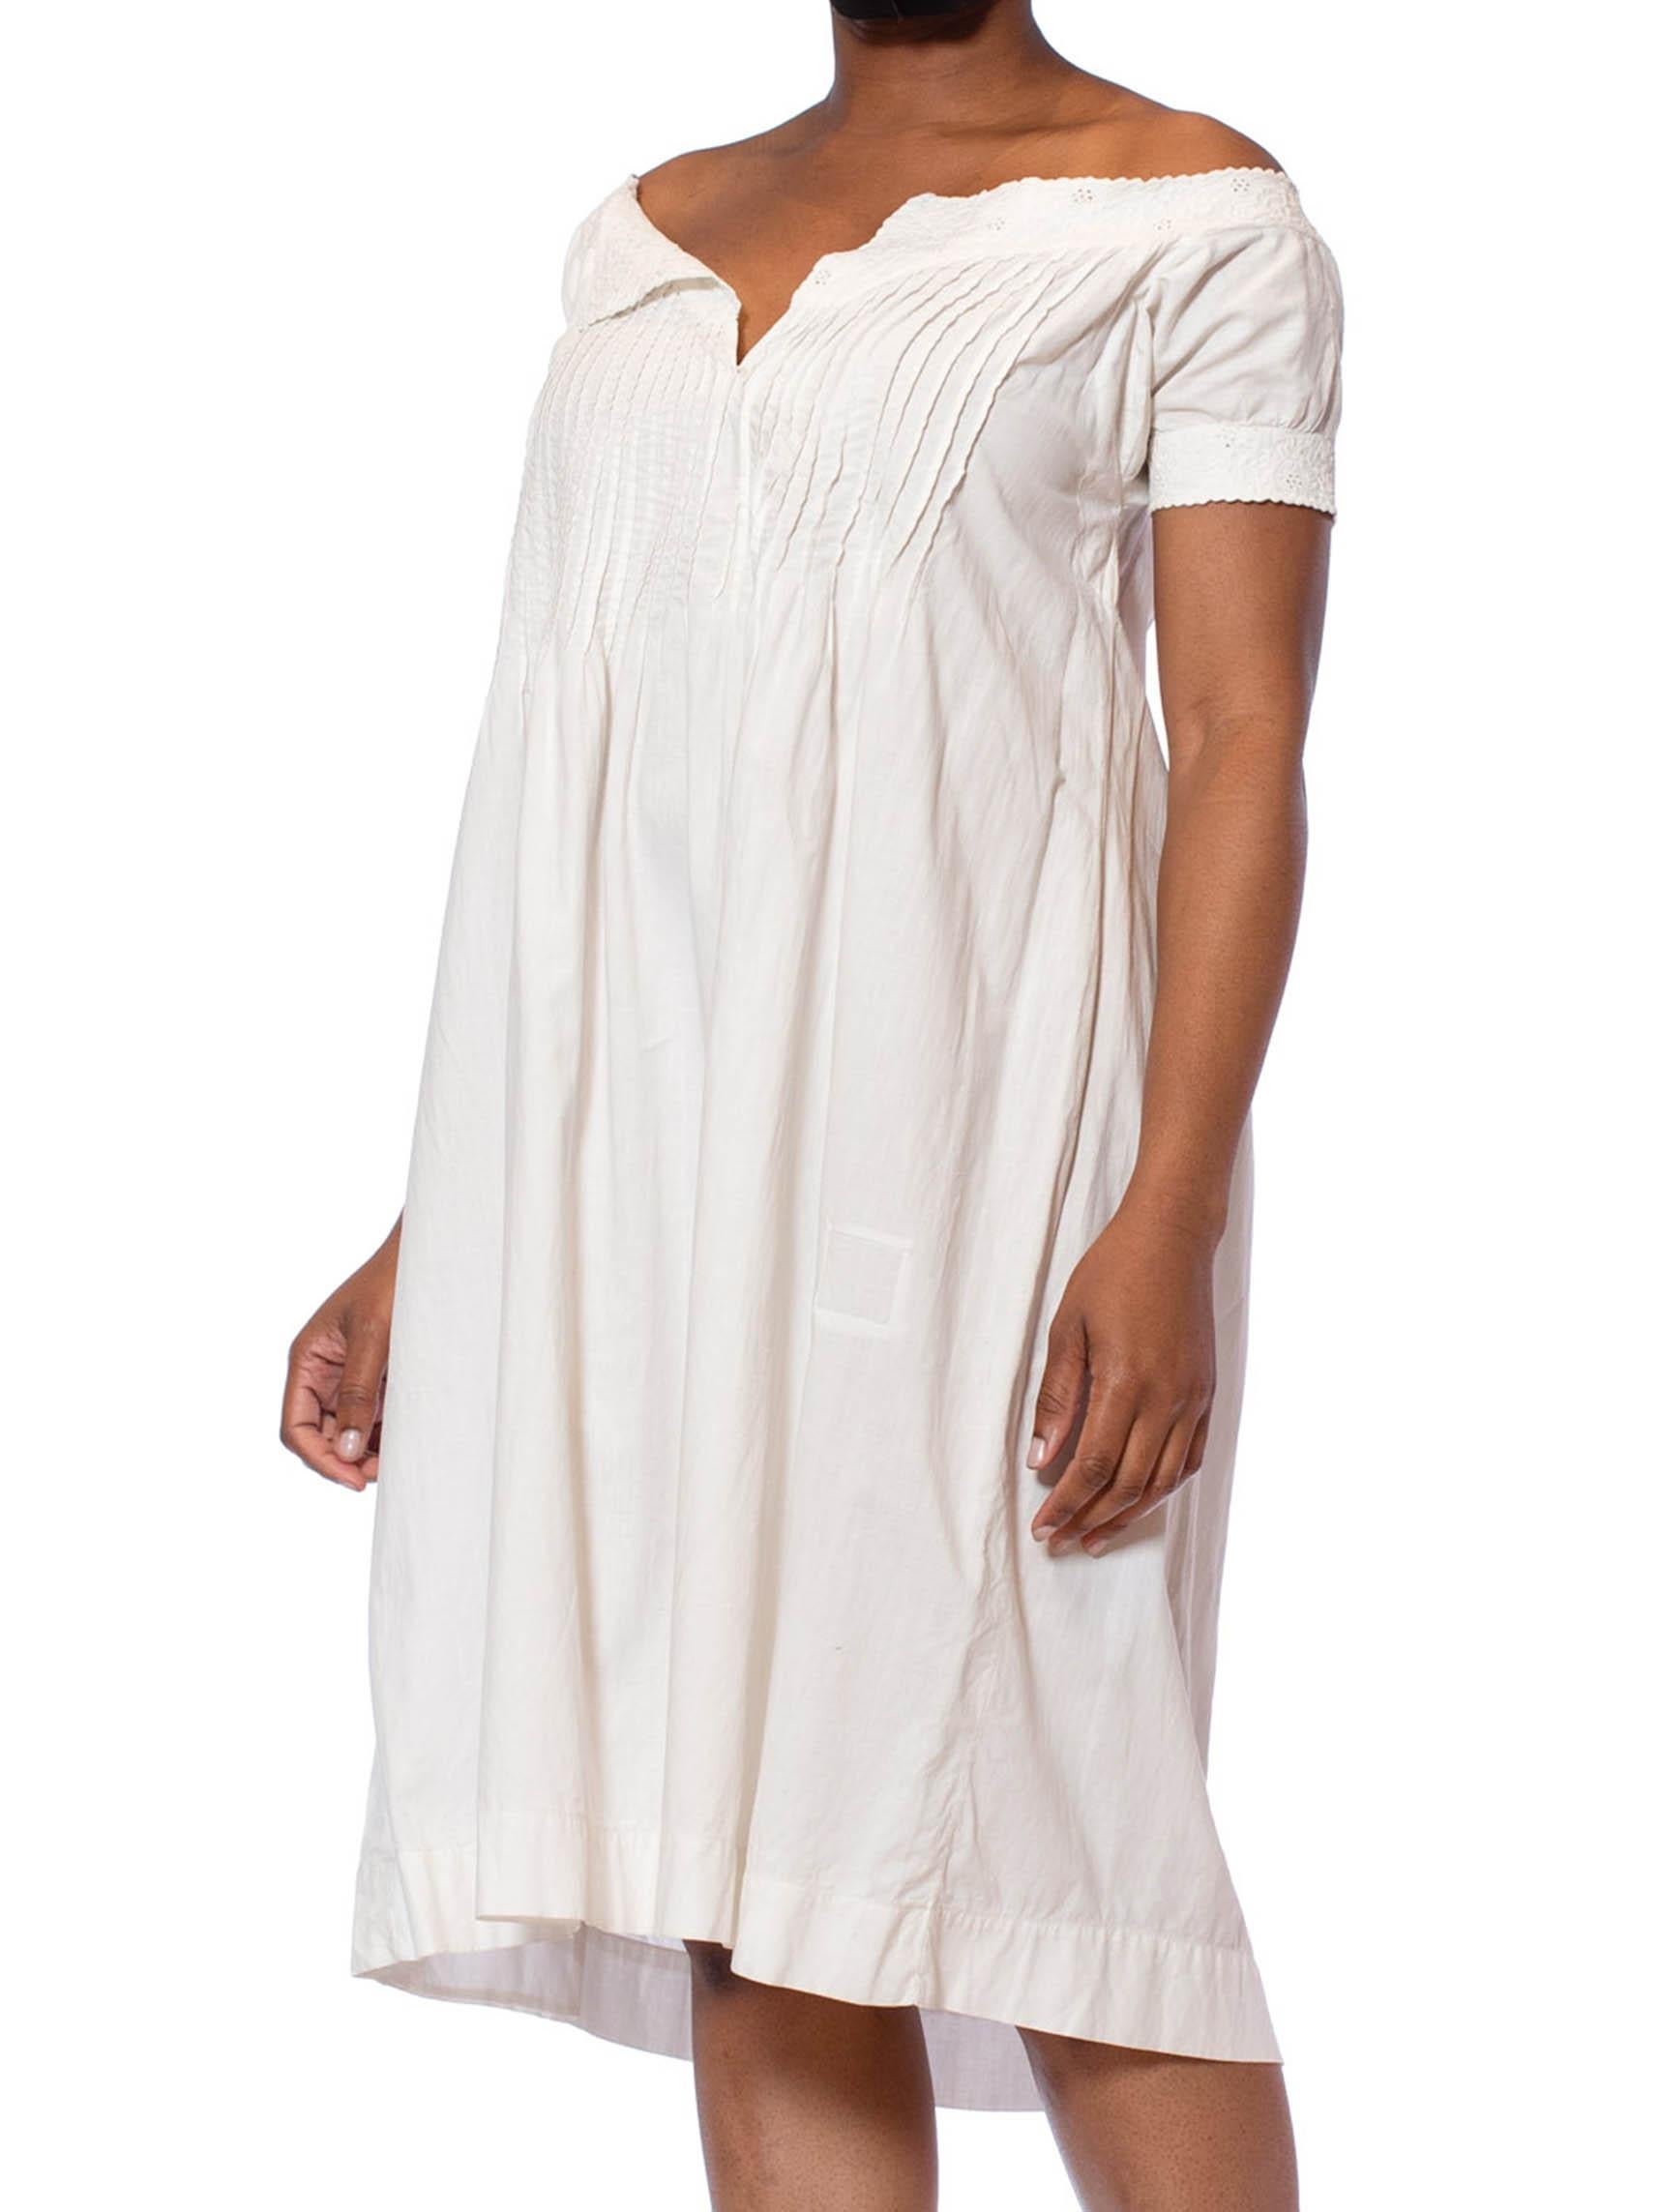 Women's Victorian White Hand Embroidered Organic Cotton 1860S Chemise Dress